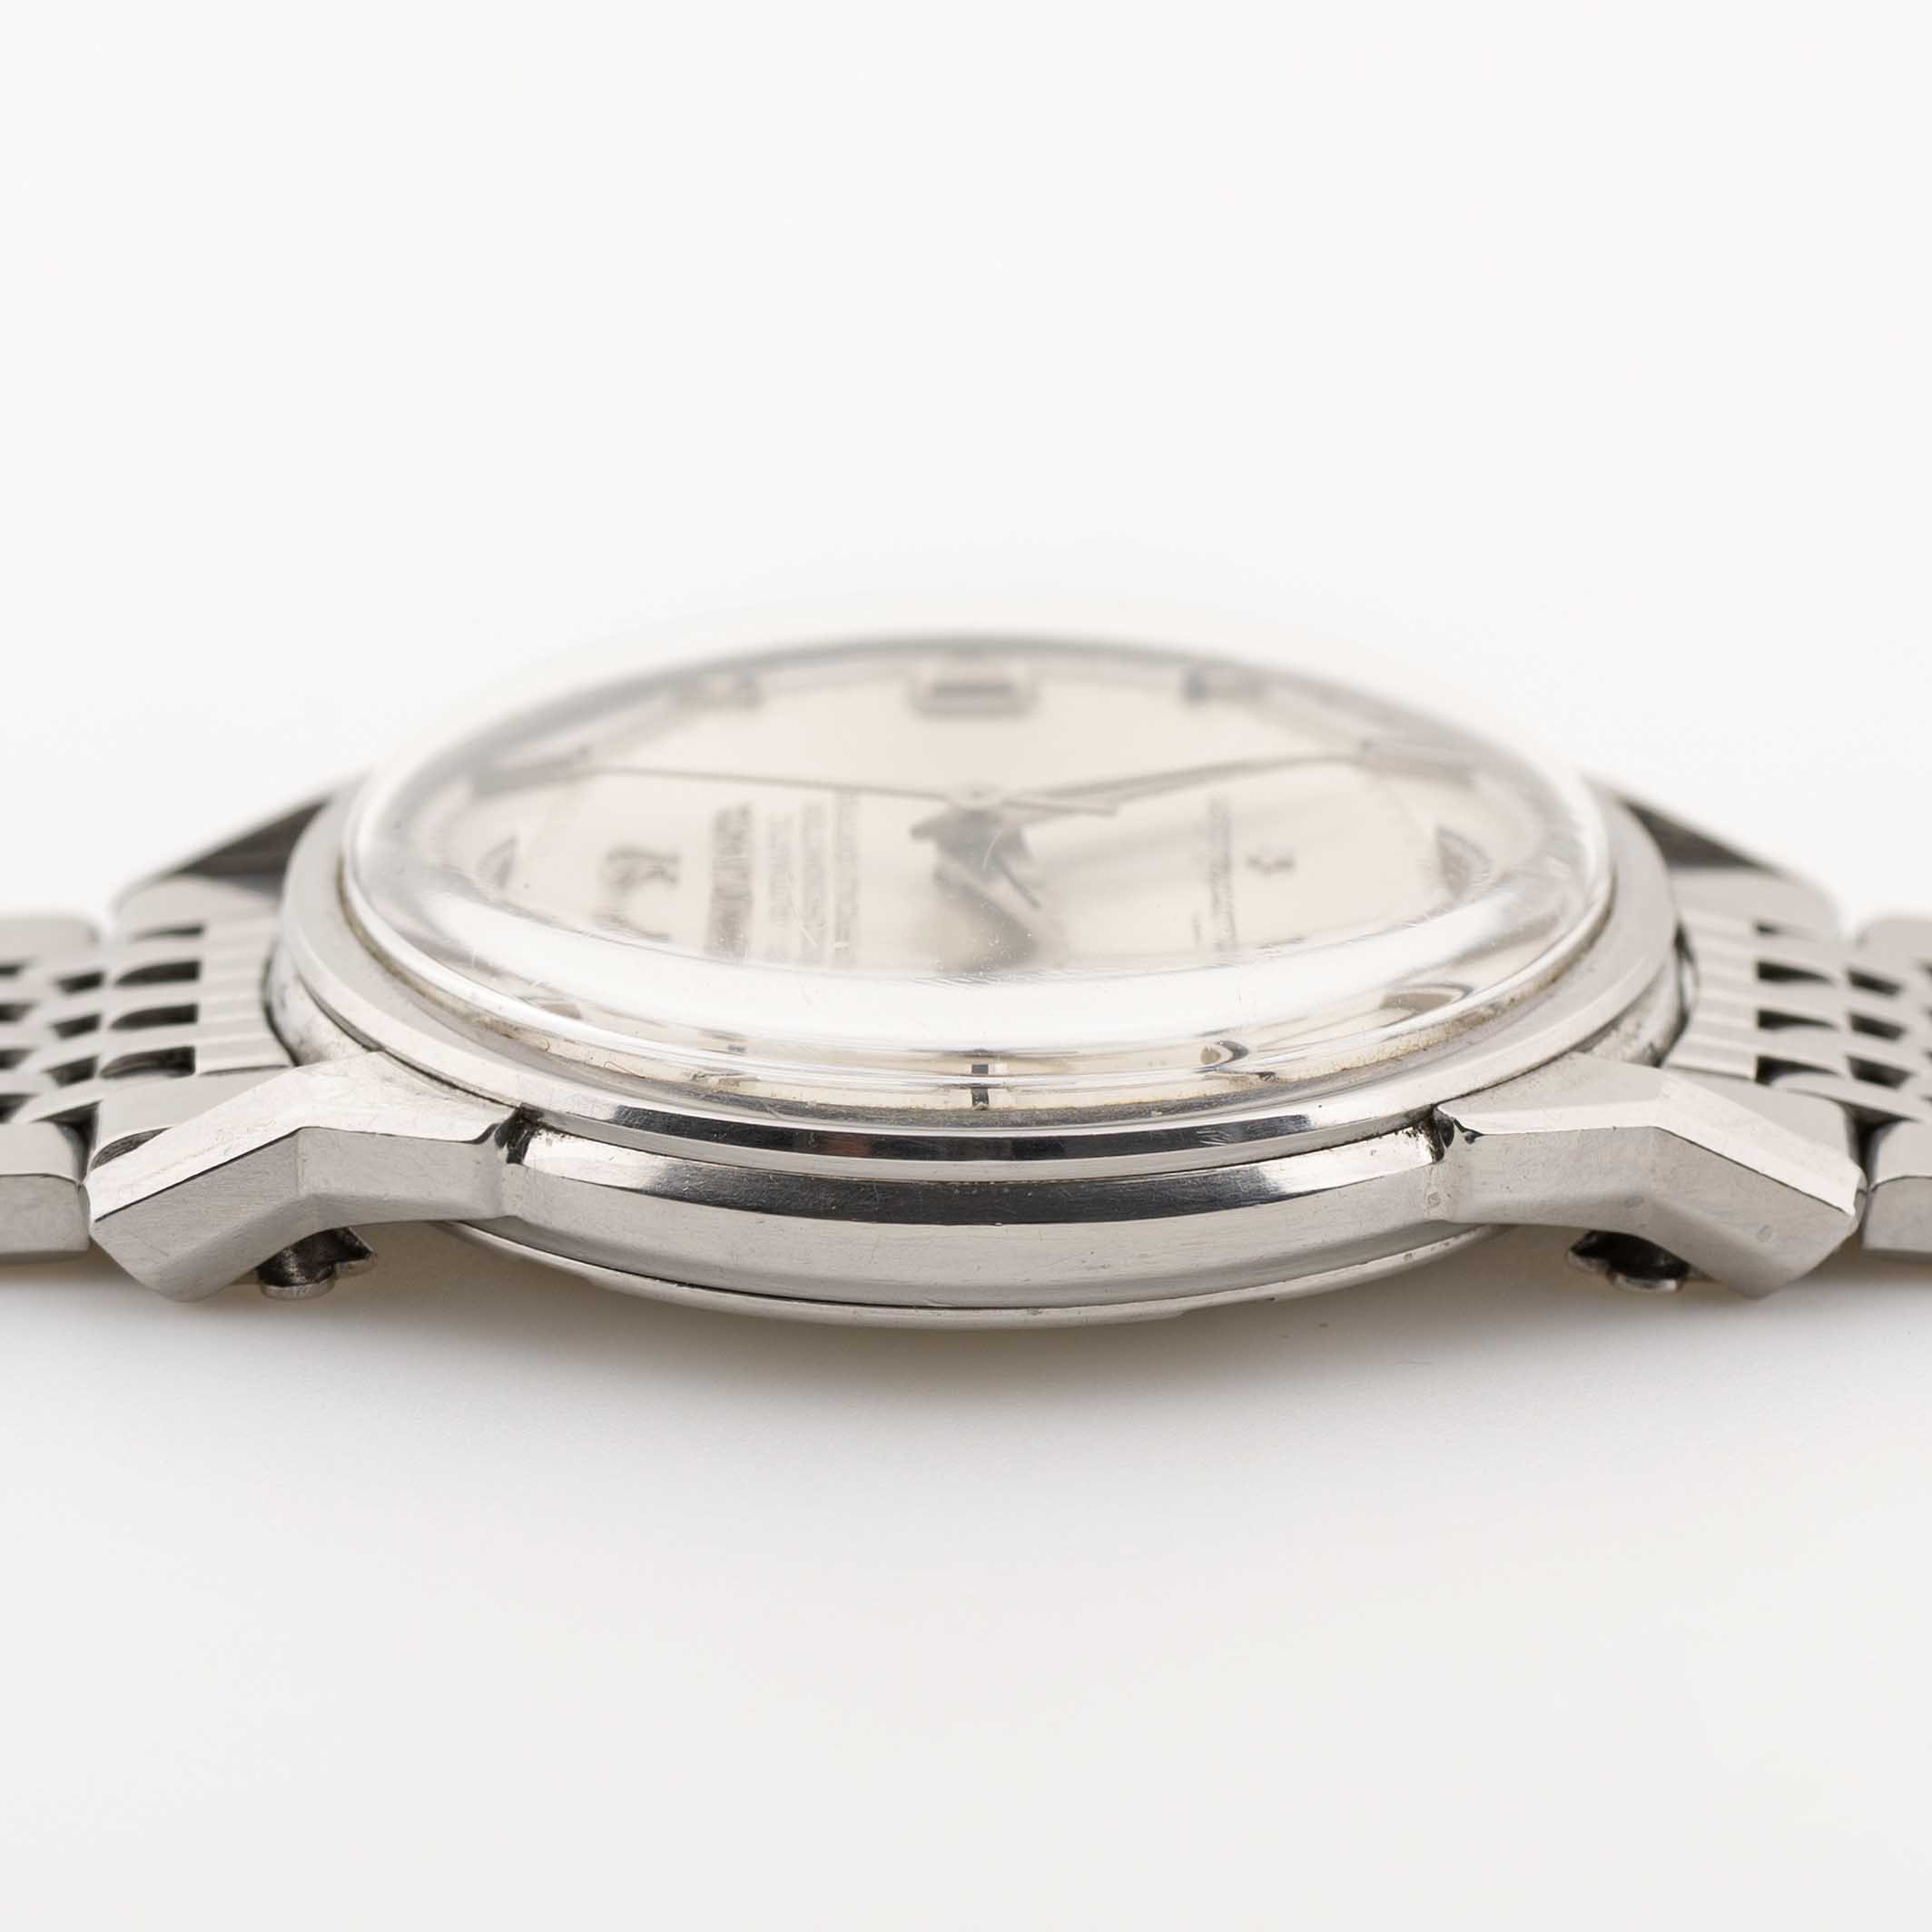 A GENTLEMAN'S STAINLESS STEEL OMEGA CONSTELLATION CHRONOMETER BRACELET WATCH CIRCA 1963, REF. 168. - Image 10 of 11